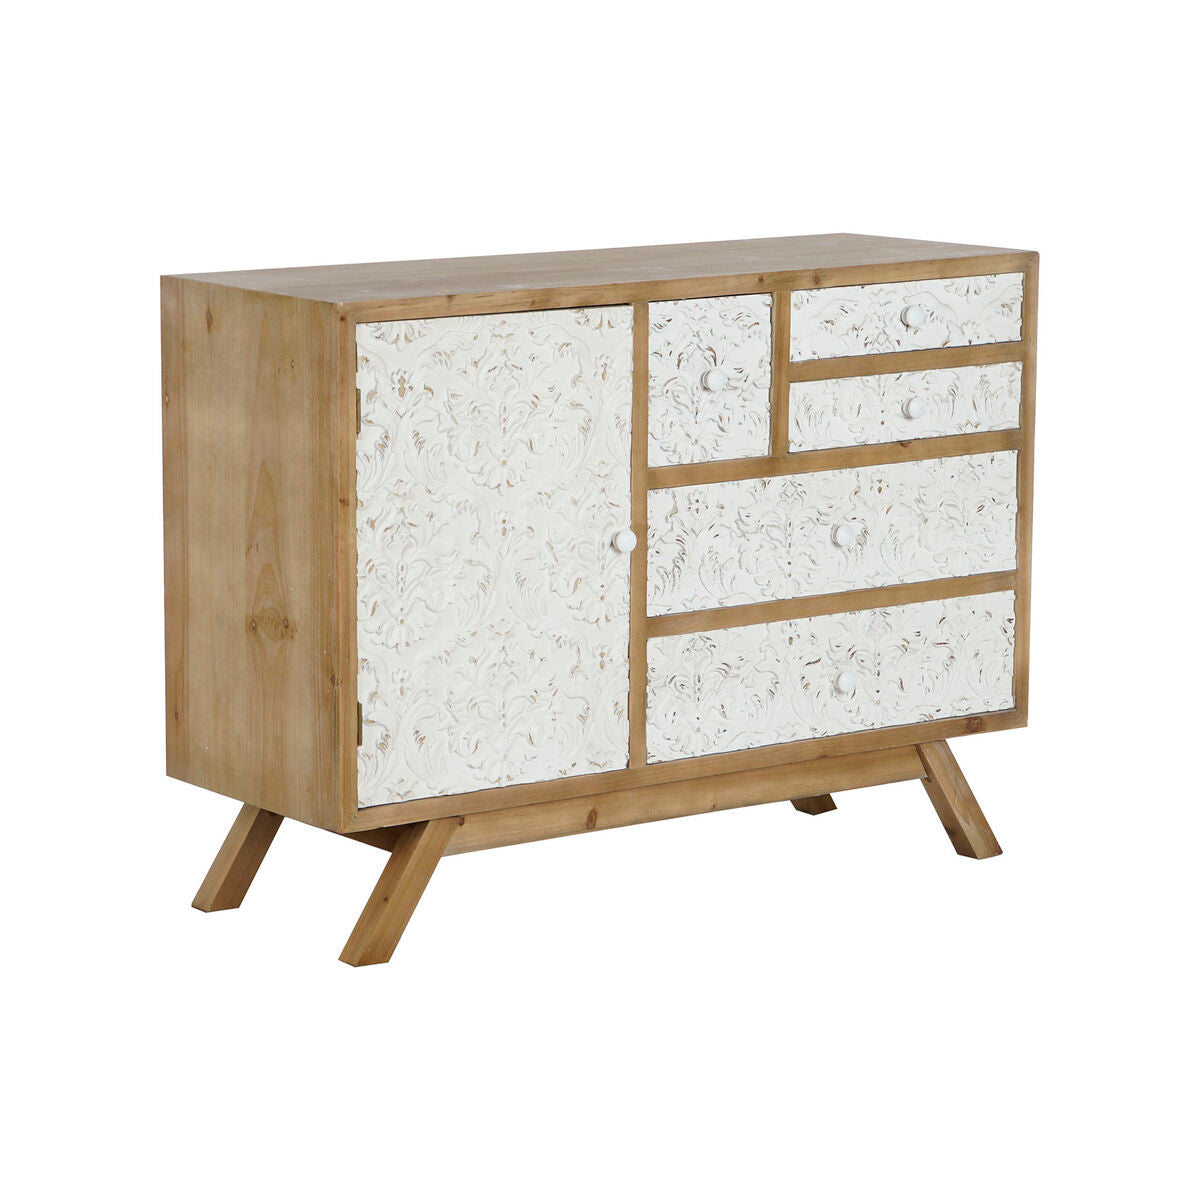 Chest of drawers in Wood and Arabic Style (106 x 38 x 78,5 cm)